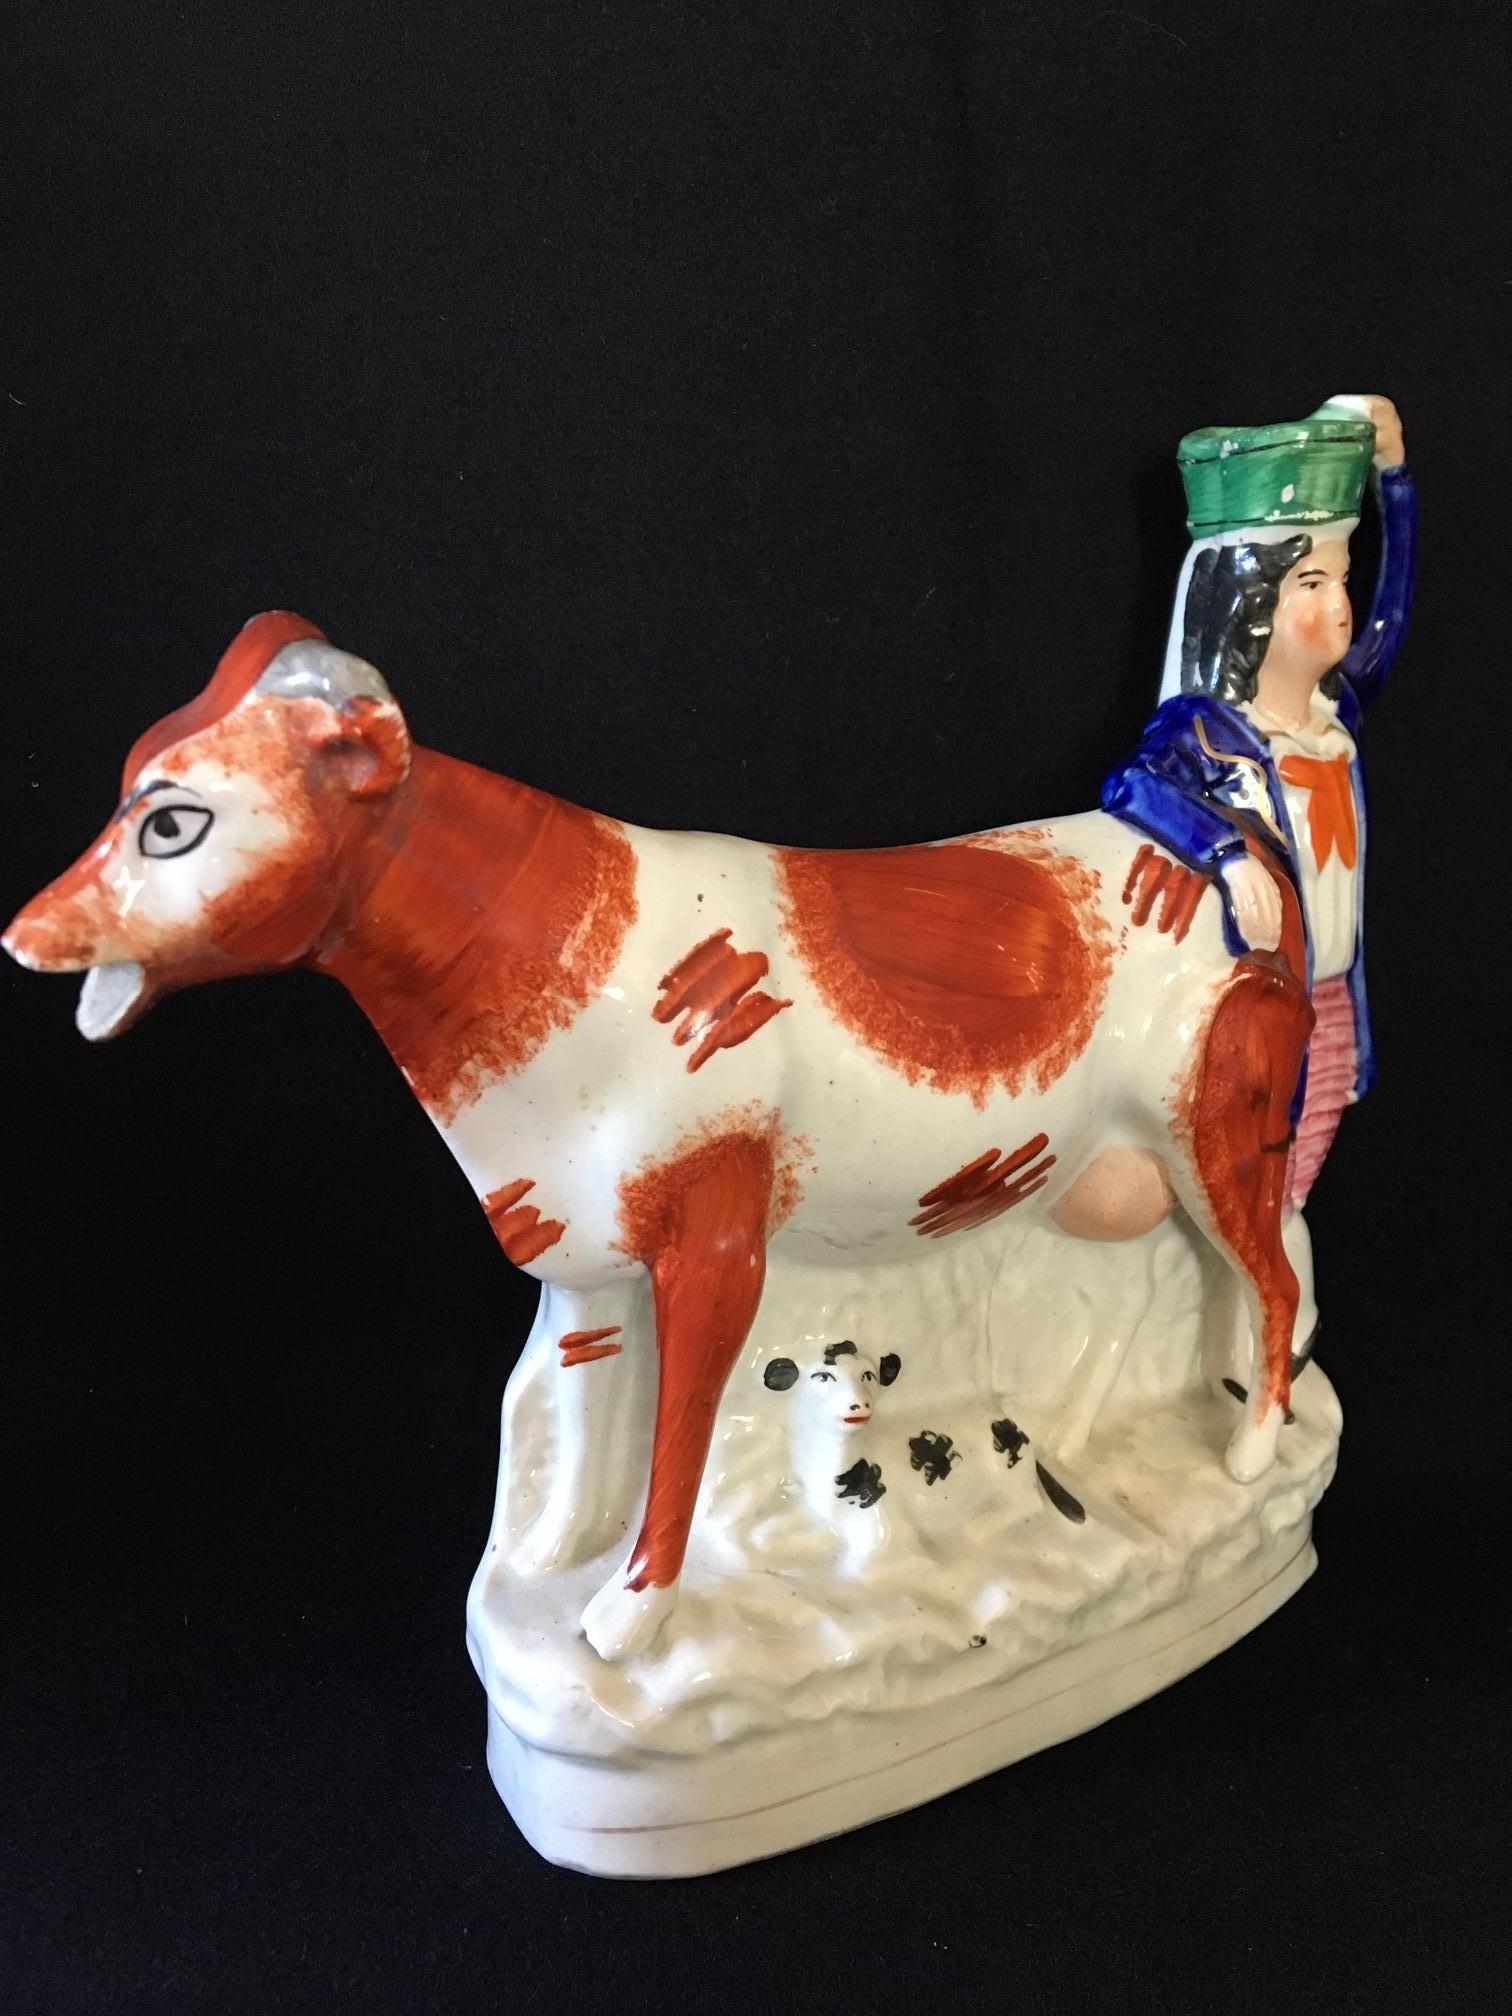 Attractive 19th century English Staffordshire cattle figure, circa 1870.
This delightful figure is in good condition with plenty of crisp color,
no breaks or repairs and with particularly good features of the cows head.
Dimensions 9 ins high. 11